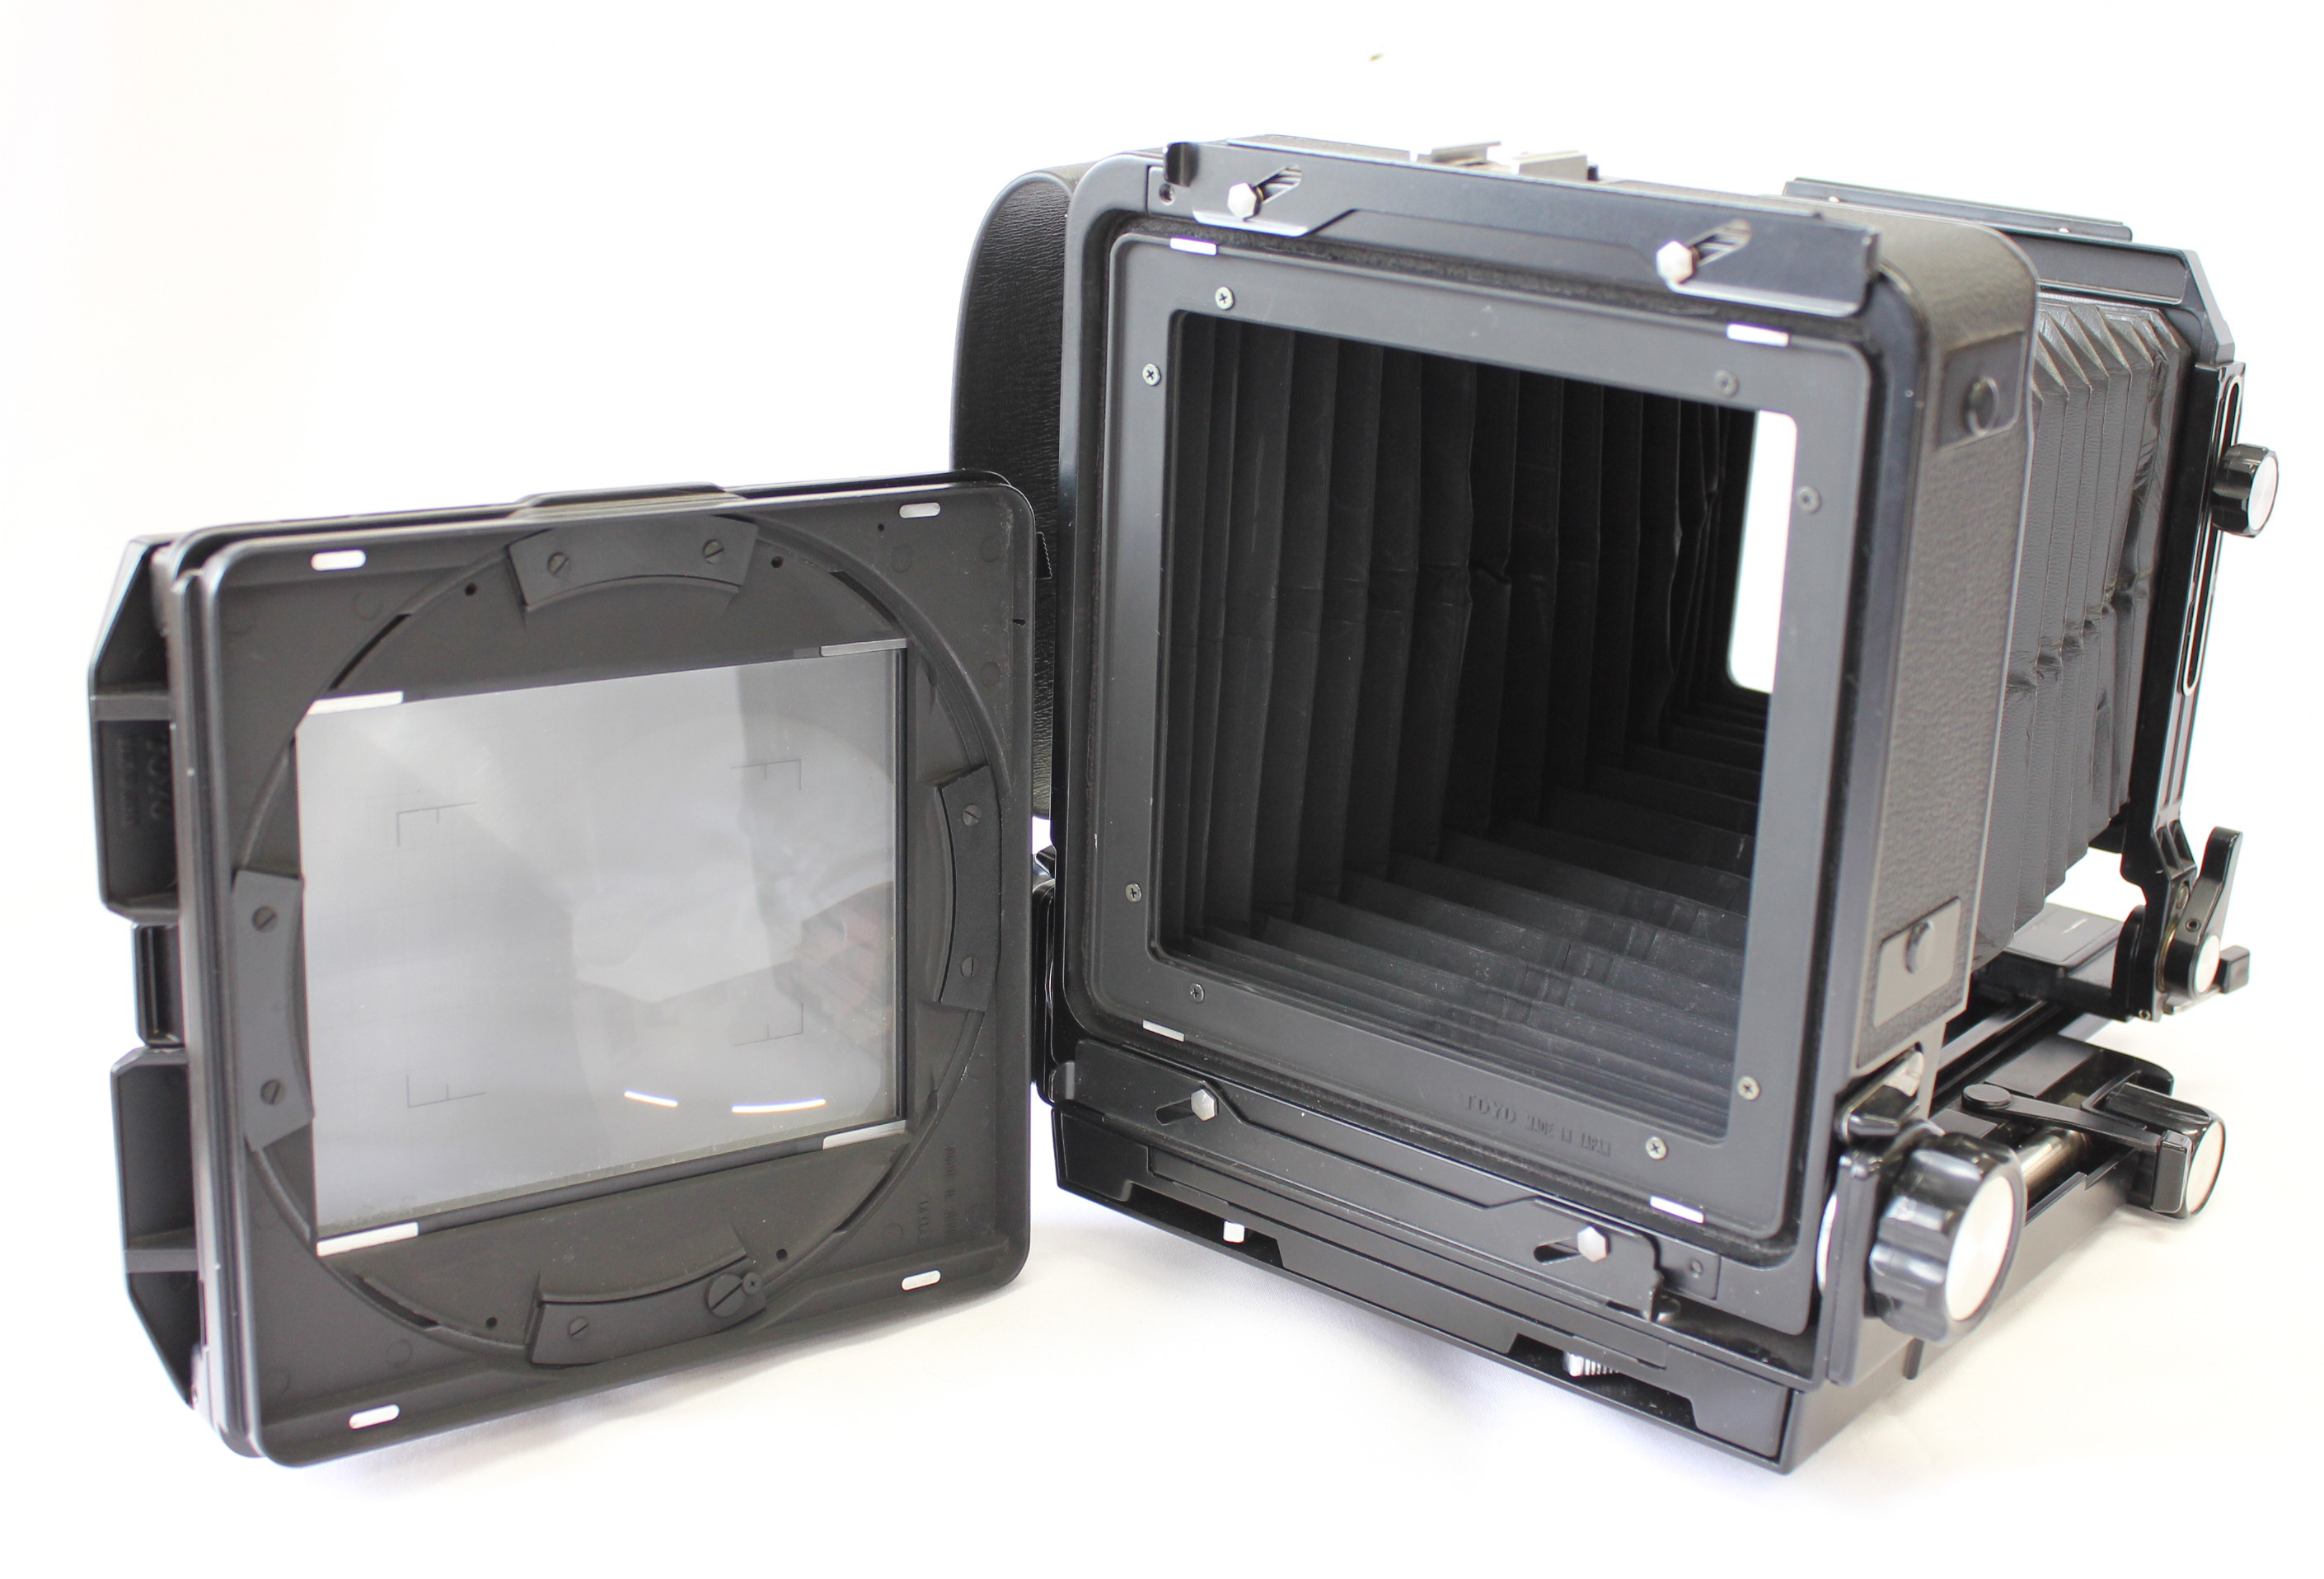  Toyo Field 45A 4x5 Large Format Film Camera with Revolving Back and 3 Cut Film Holders from Japan Photo 12